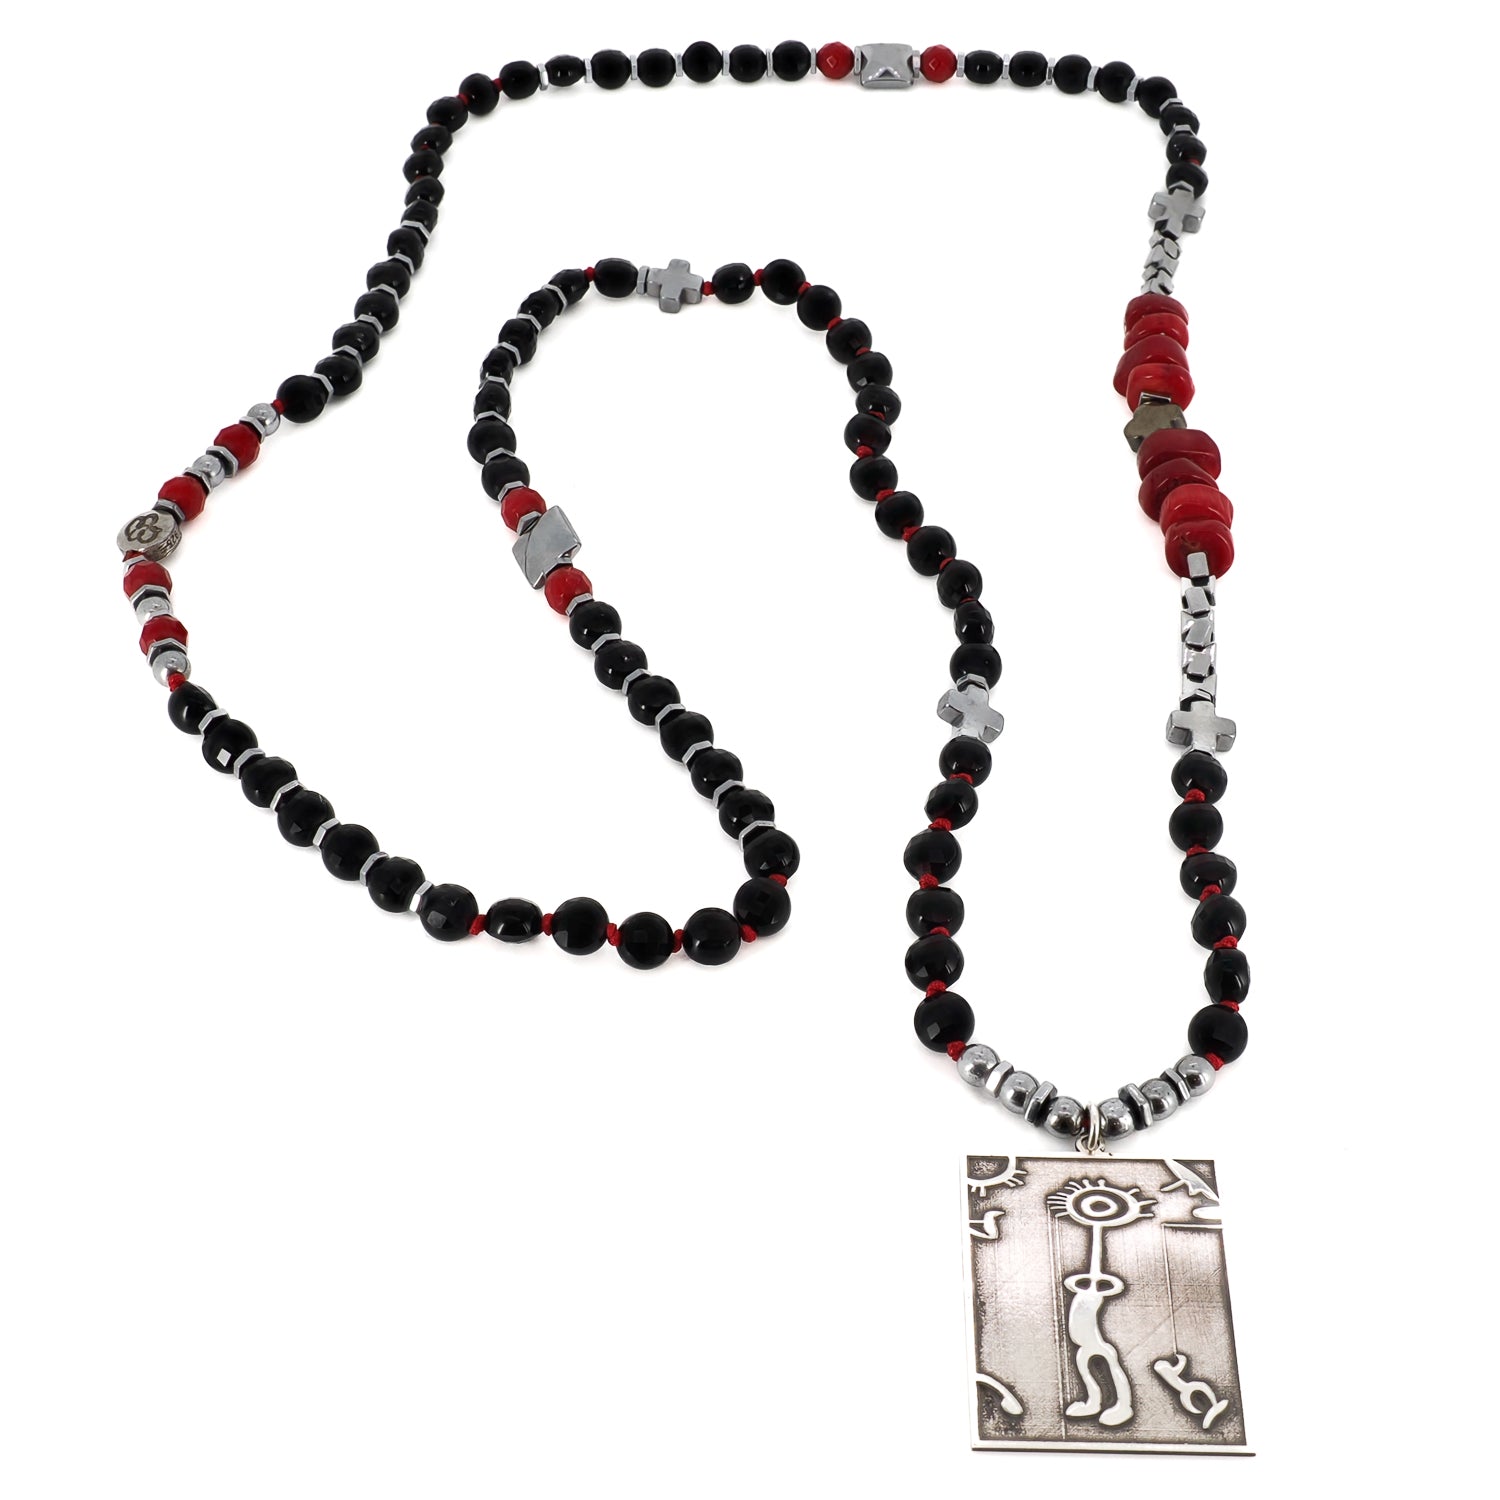 Grounding and Protective - The Onyx Necklace with Shamanic Symbol Pendant.